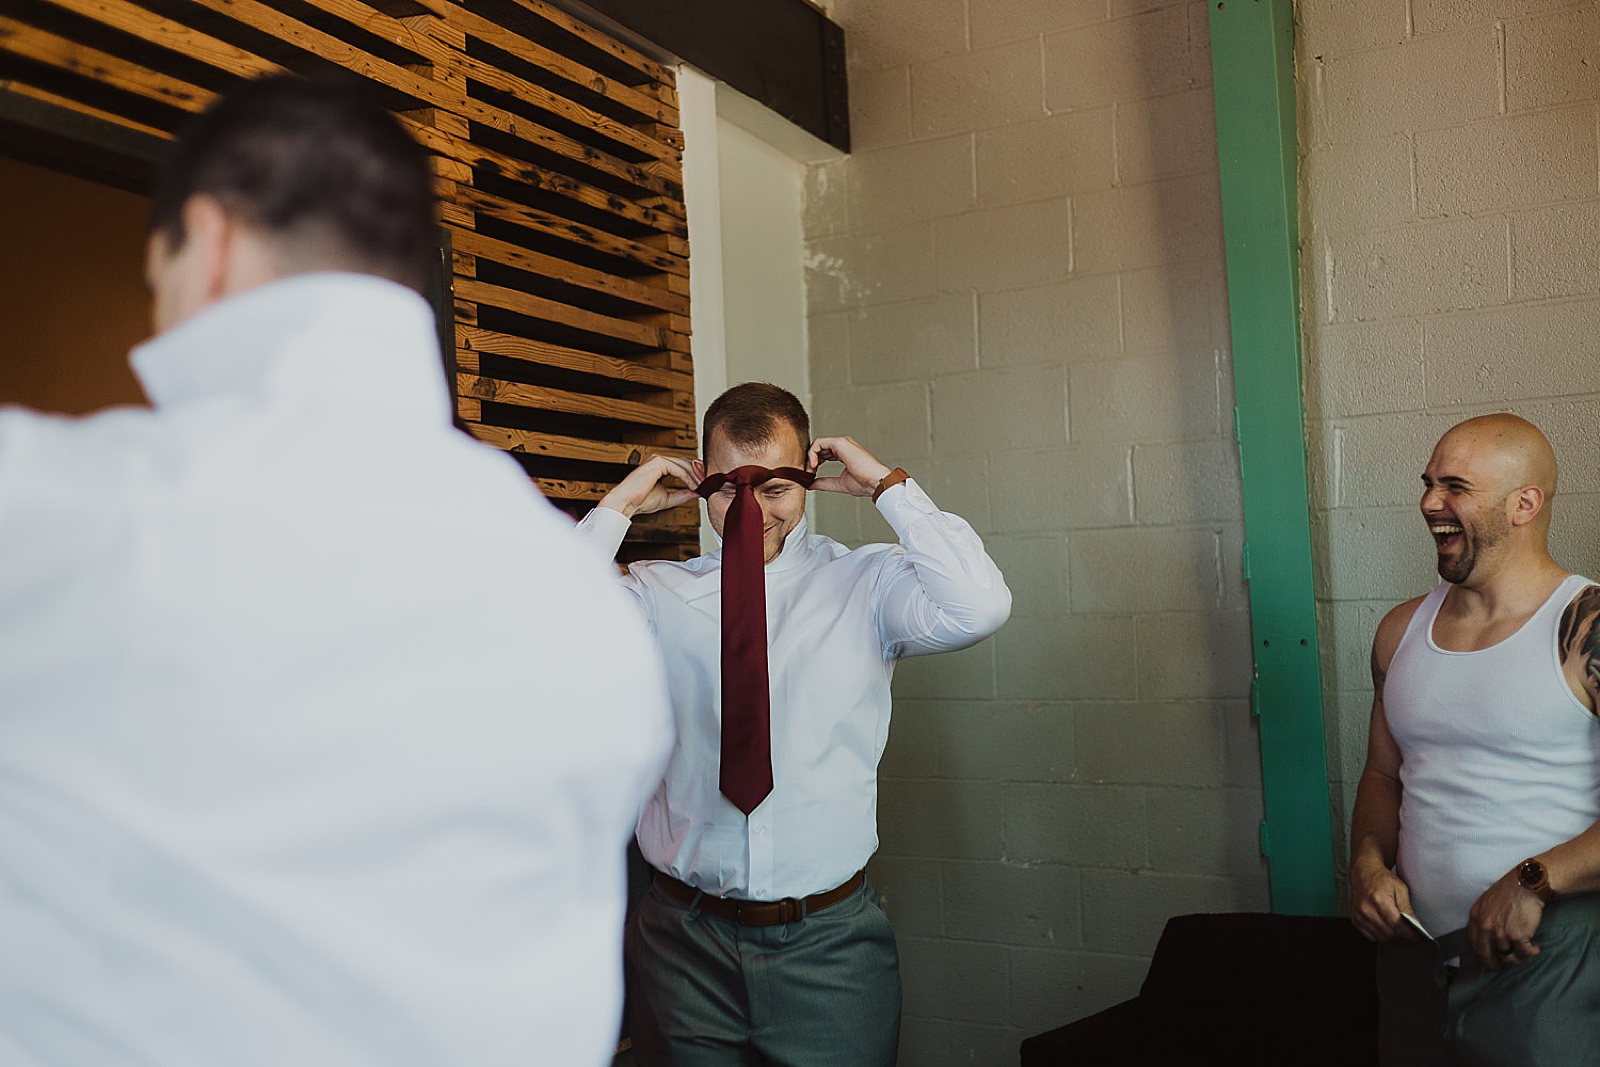 Groom Getting Ready from Kansas City Wedding at The Guild Photographed by Caitlyn Cloud Photography